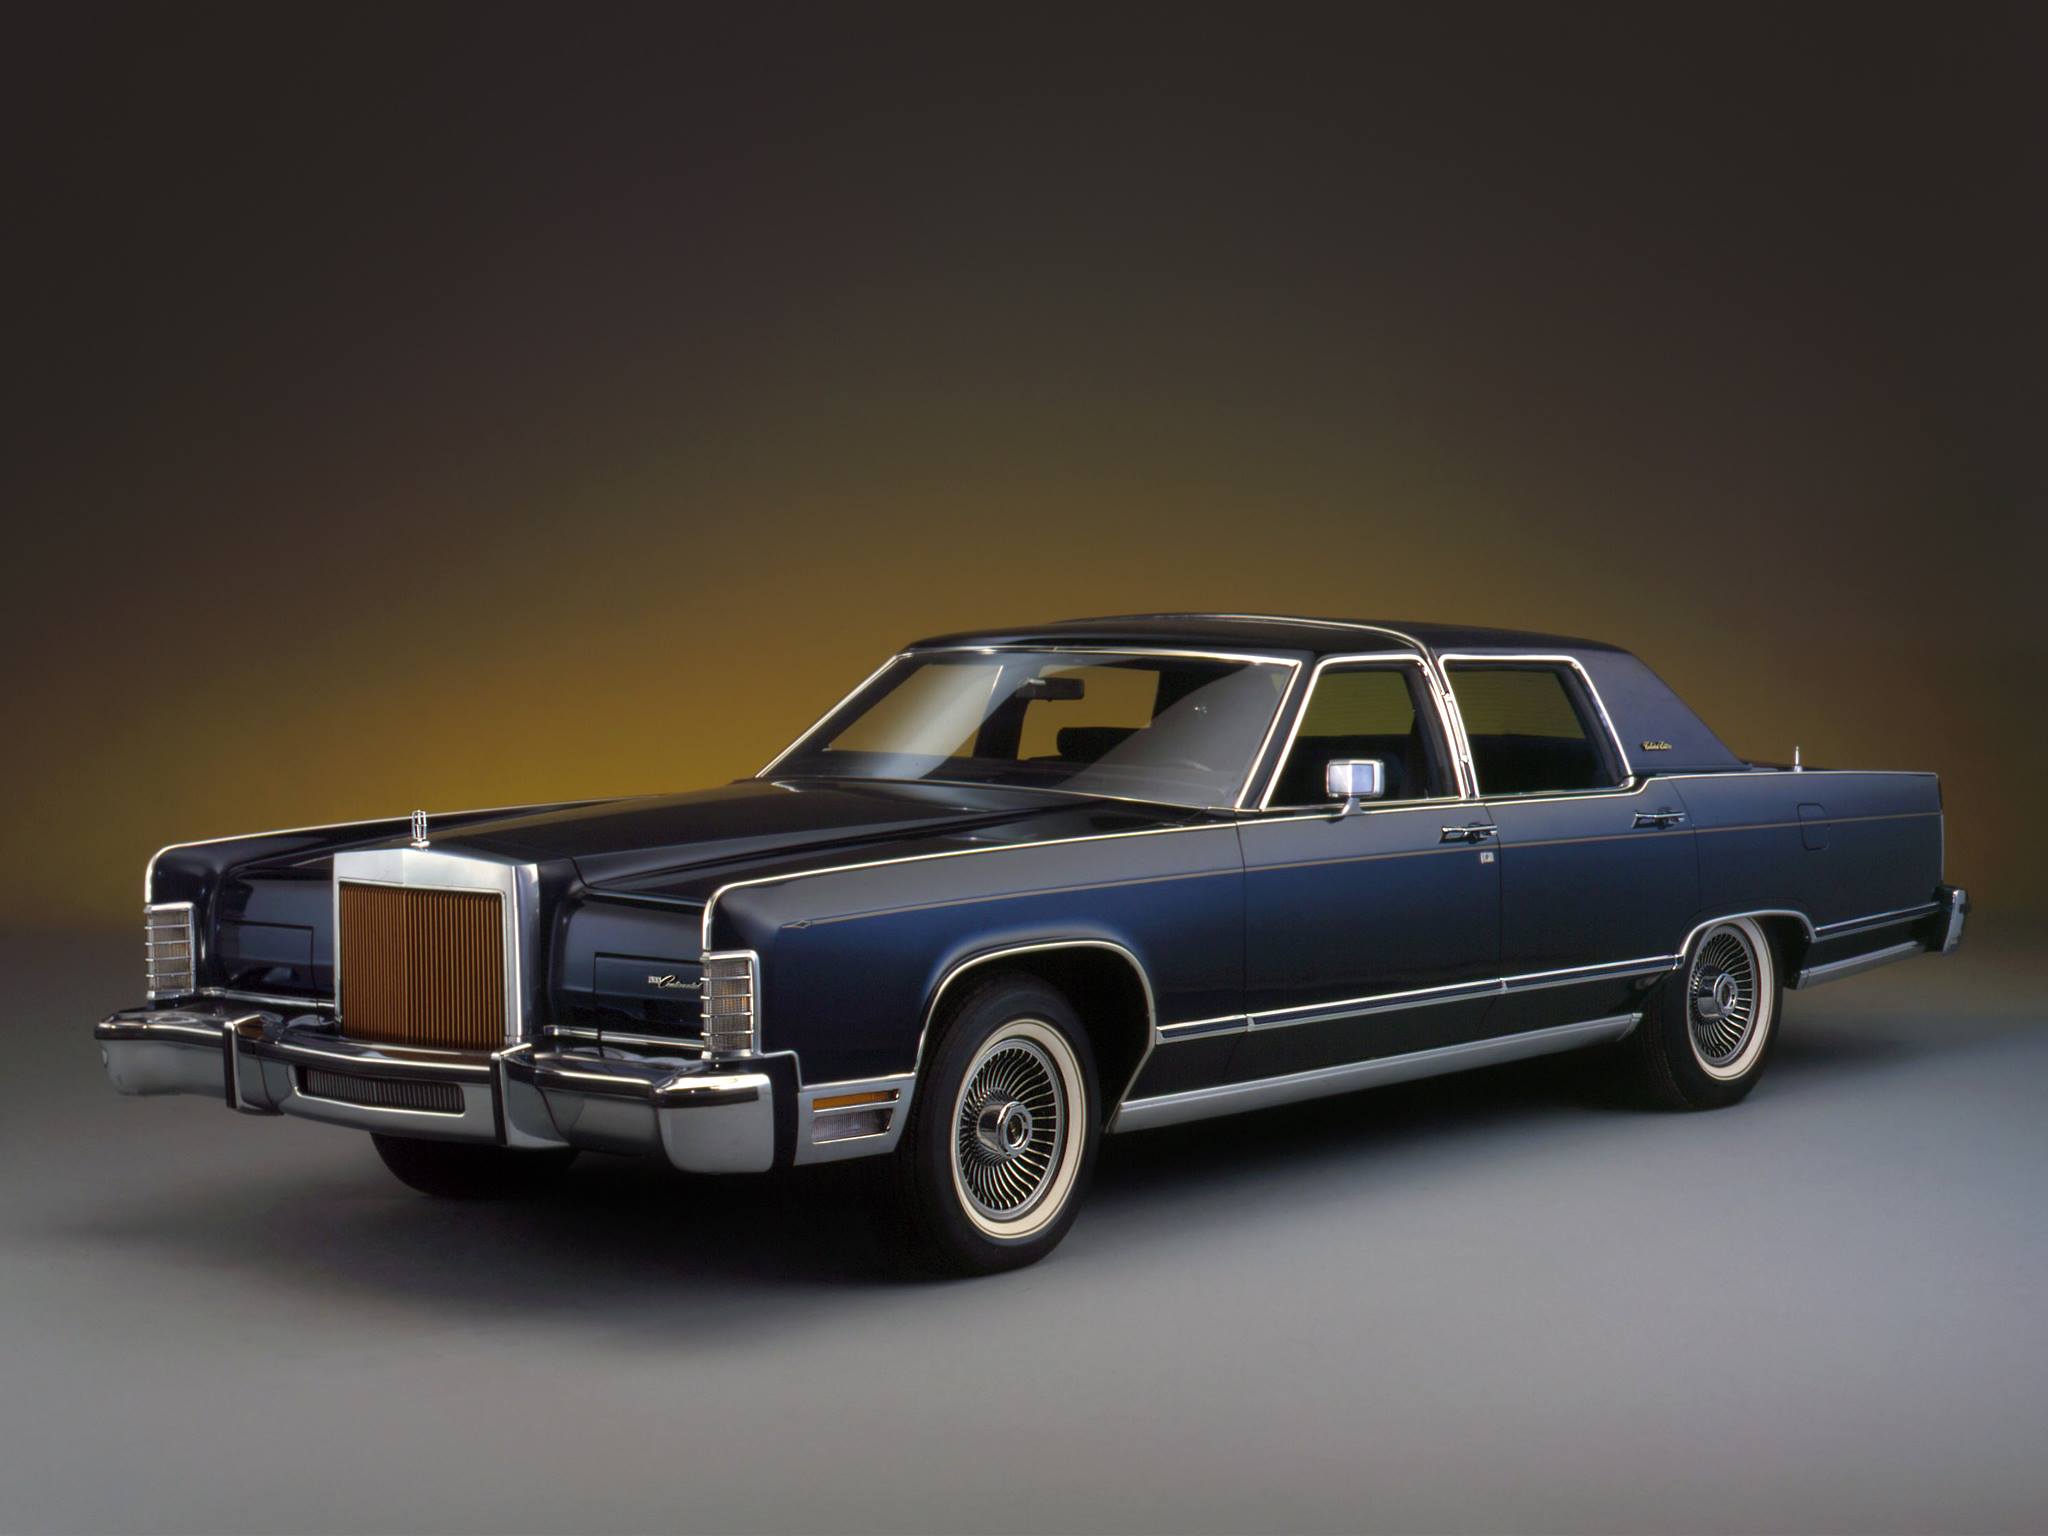 Lincoln Continental: The First Car In Hip Hop